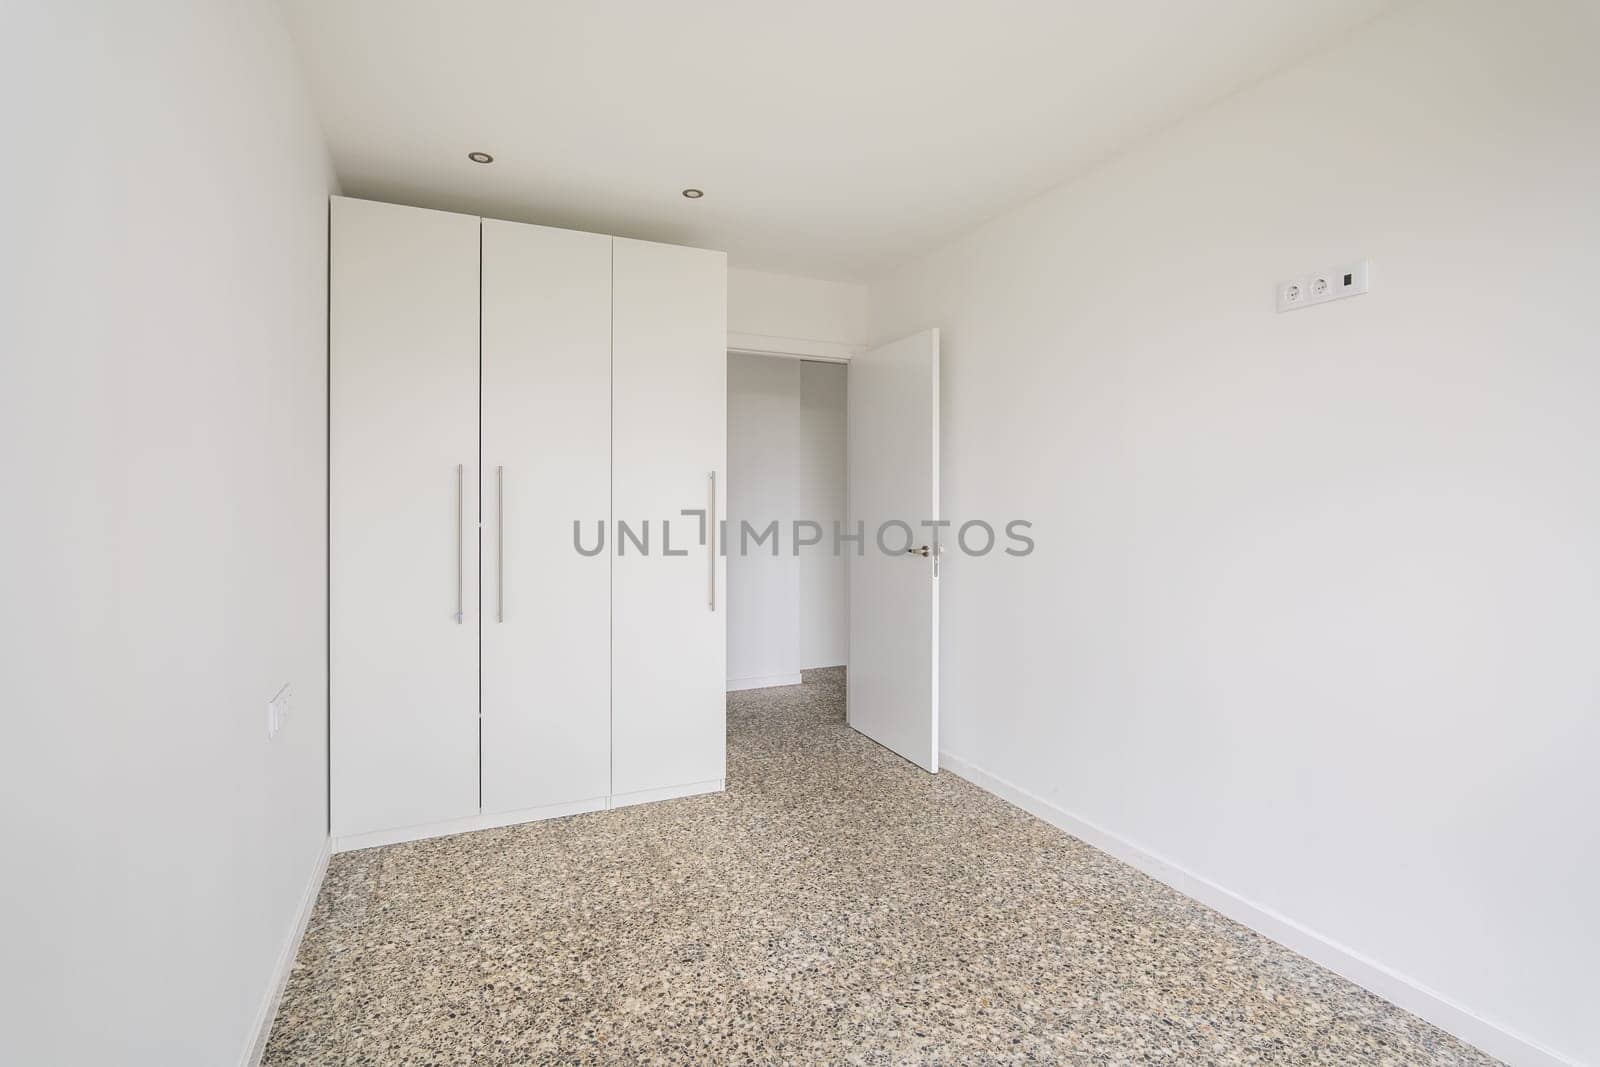 Interior of empty apartment, white room with wardrobe and tiled floor.